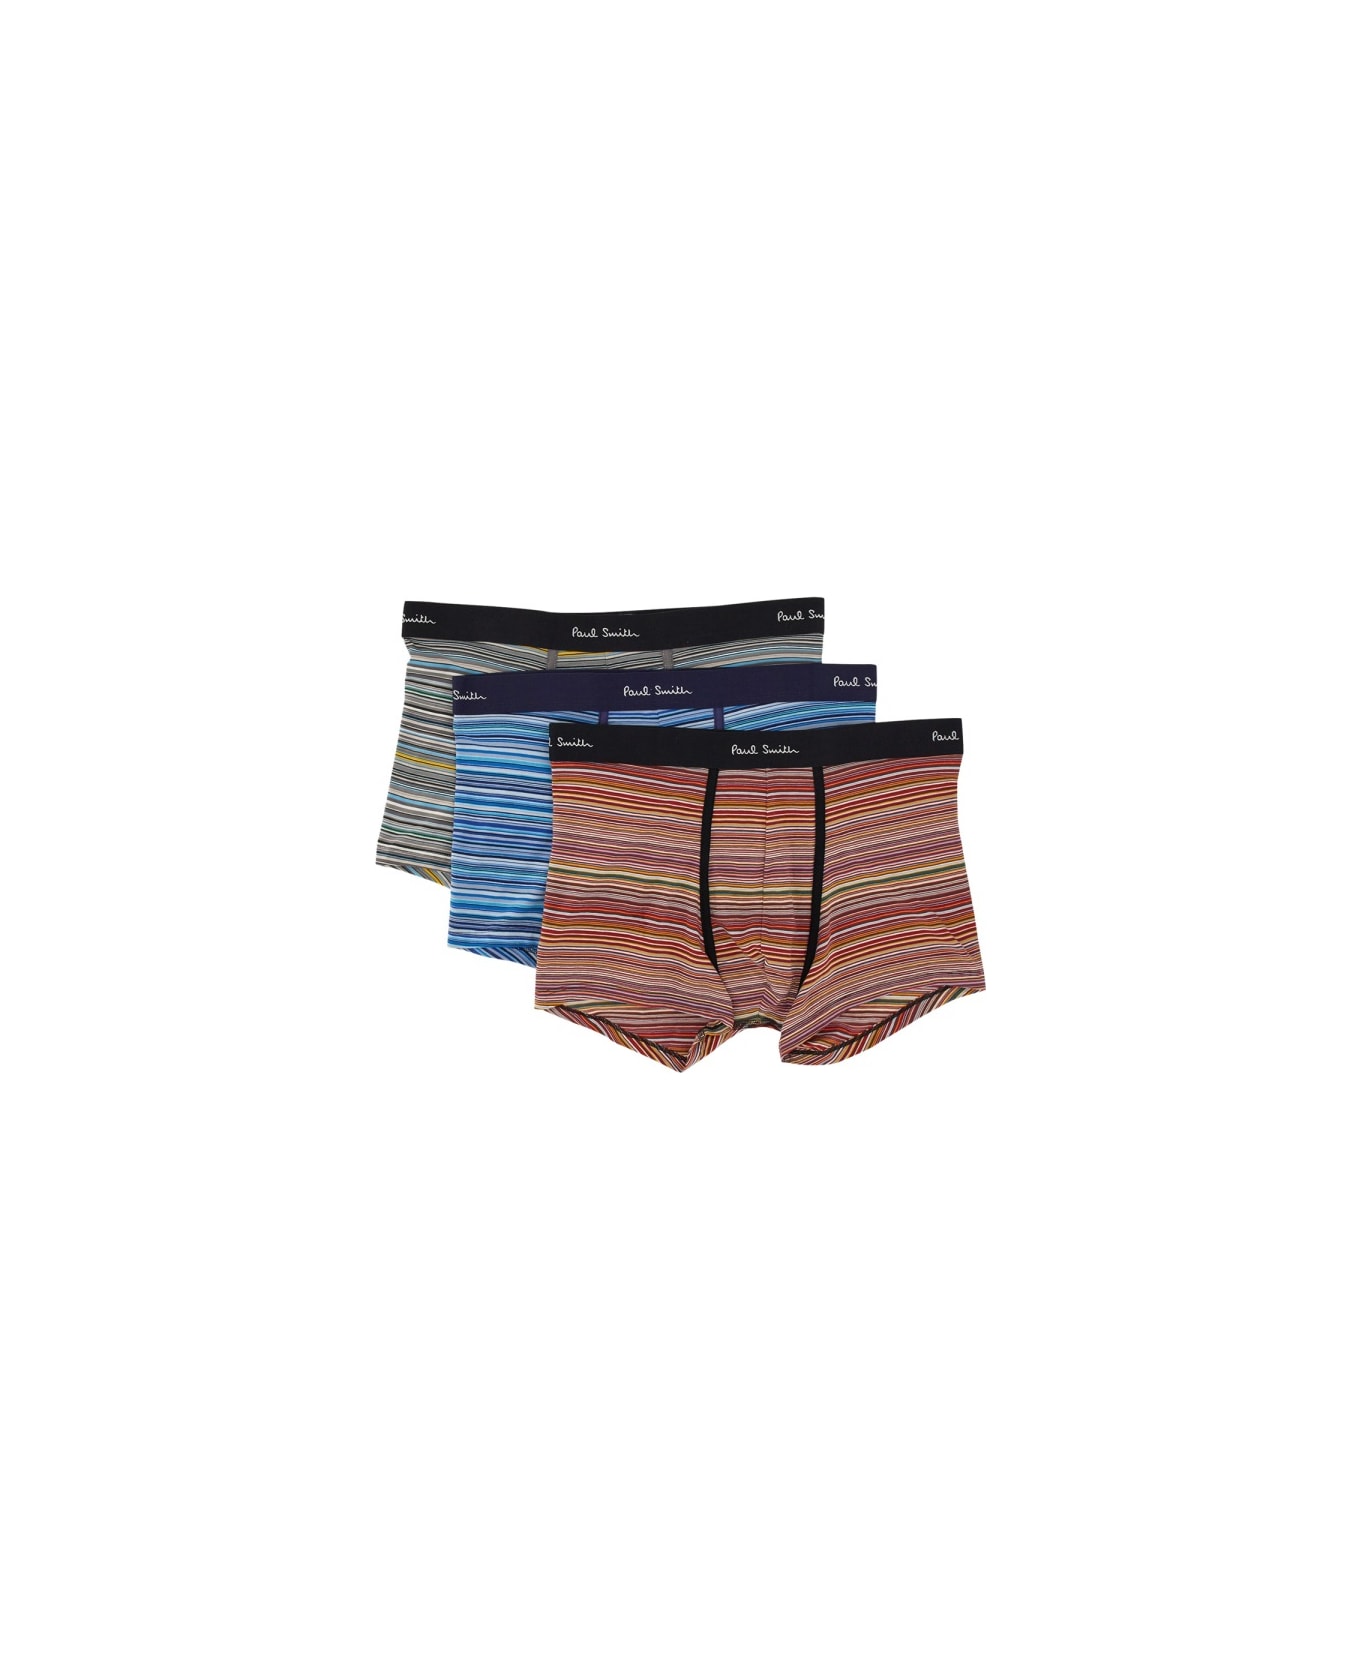 Paul Smith Pack Of Three Boxers - Multicolore